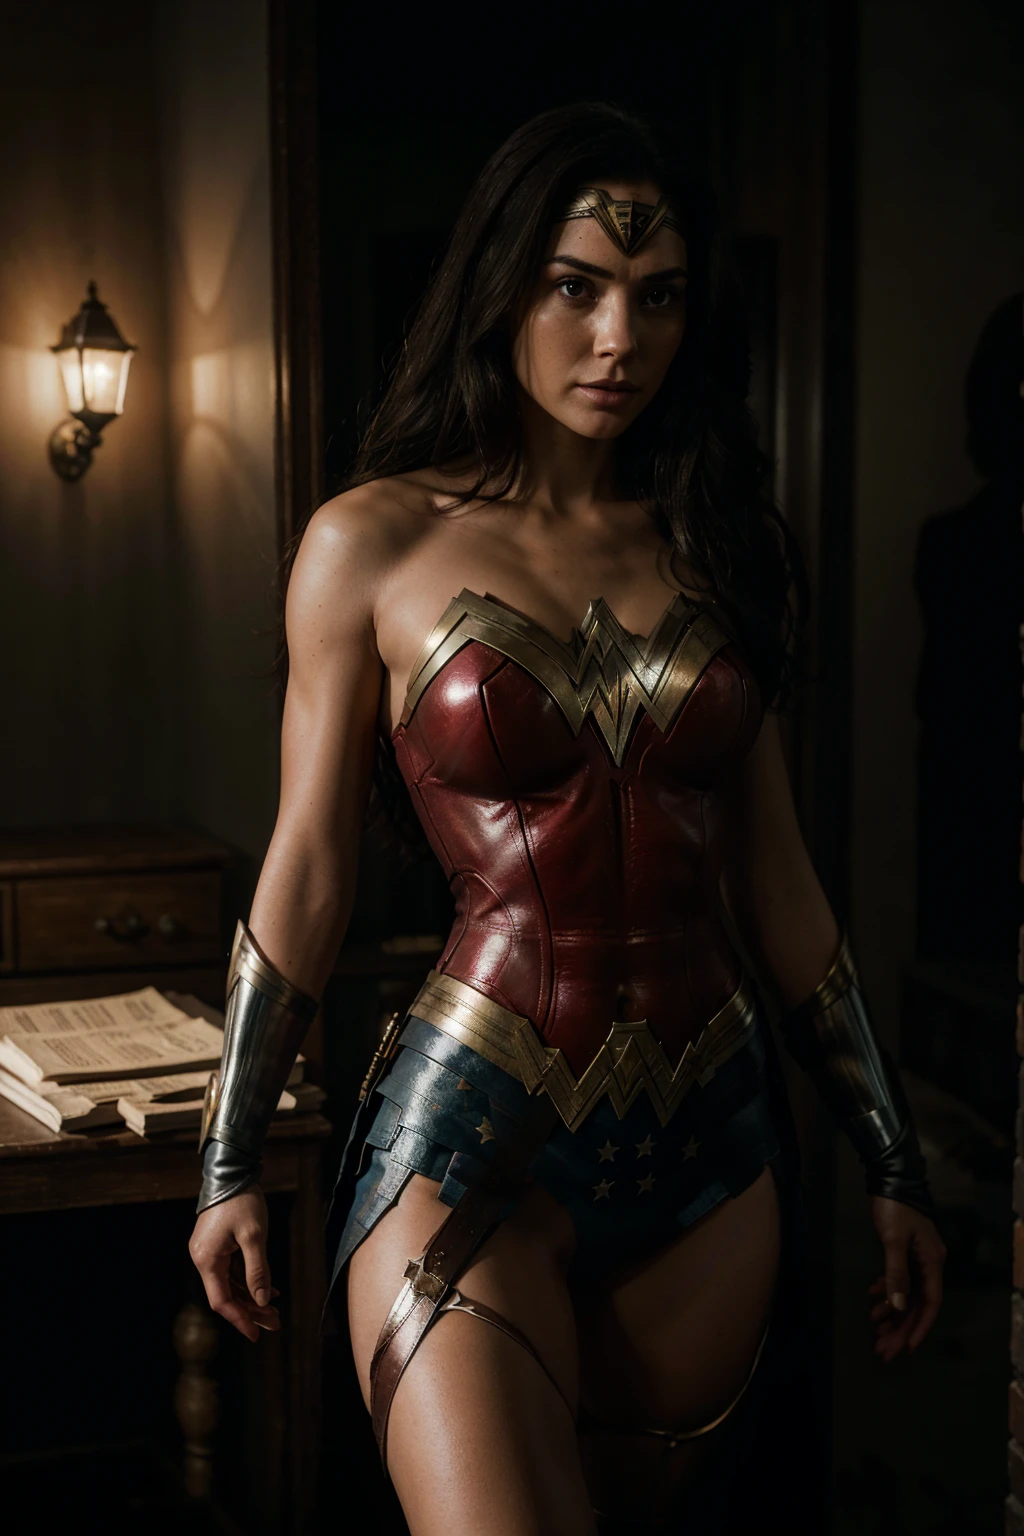 Wonder Woman is standing in a dark and mysterious environment. The scene is lit by a single light source, creating a sense of tension and suspense. The character is wearing a suit and tie, and their face is obscured by shadows. The image is rendered in high detail, with realistic textures and materials. The overall effect is a visually stunning and thought-provoking image that is sure to keep viewers engaged.
